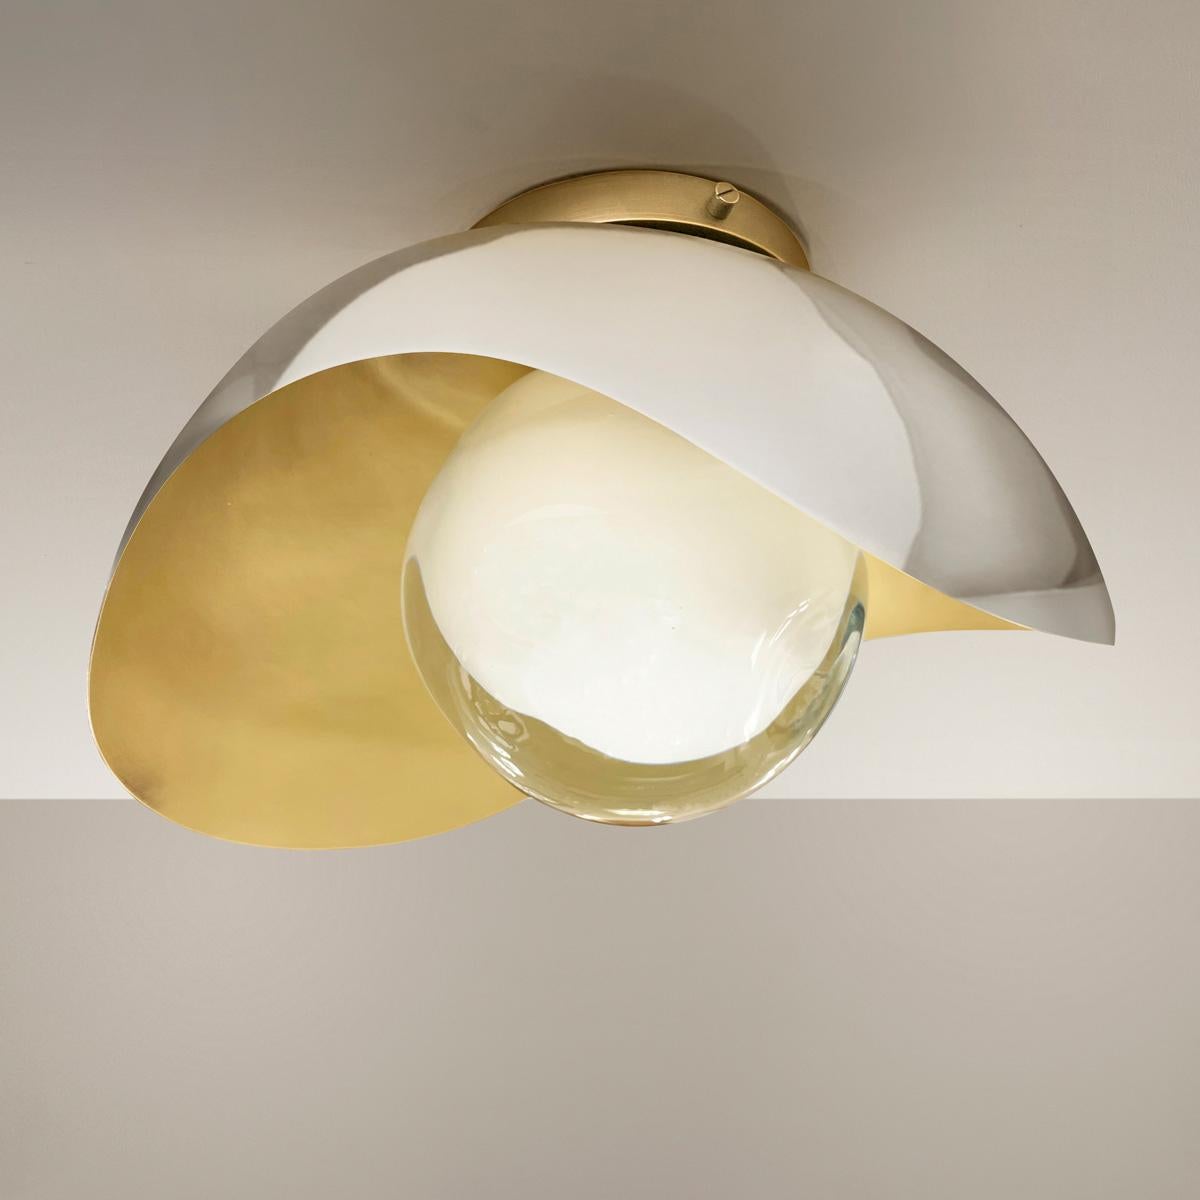 The Perla flushmount features an organic brass shell nestling our Sfera glass handblown in Tuscany. The first images show the fixture with a satin brass interior and polished nickel exterior finish-subsequent pictures show it in a selection of